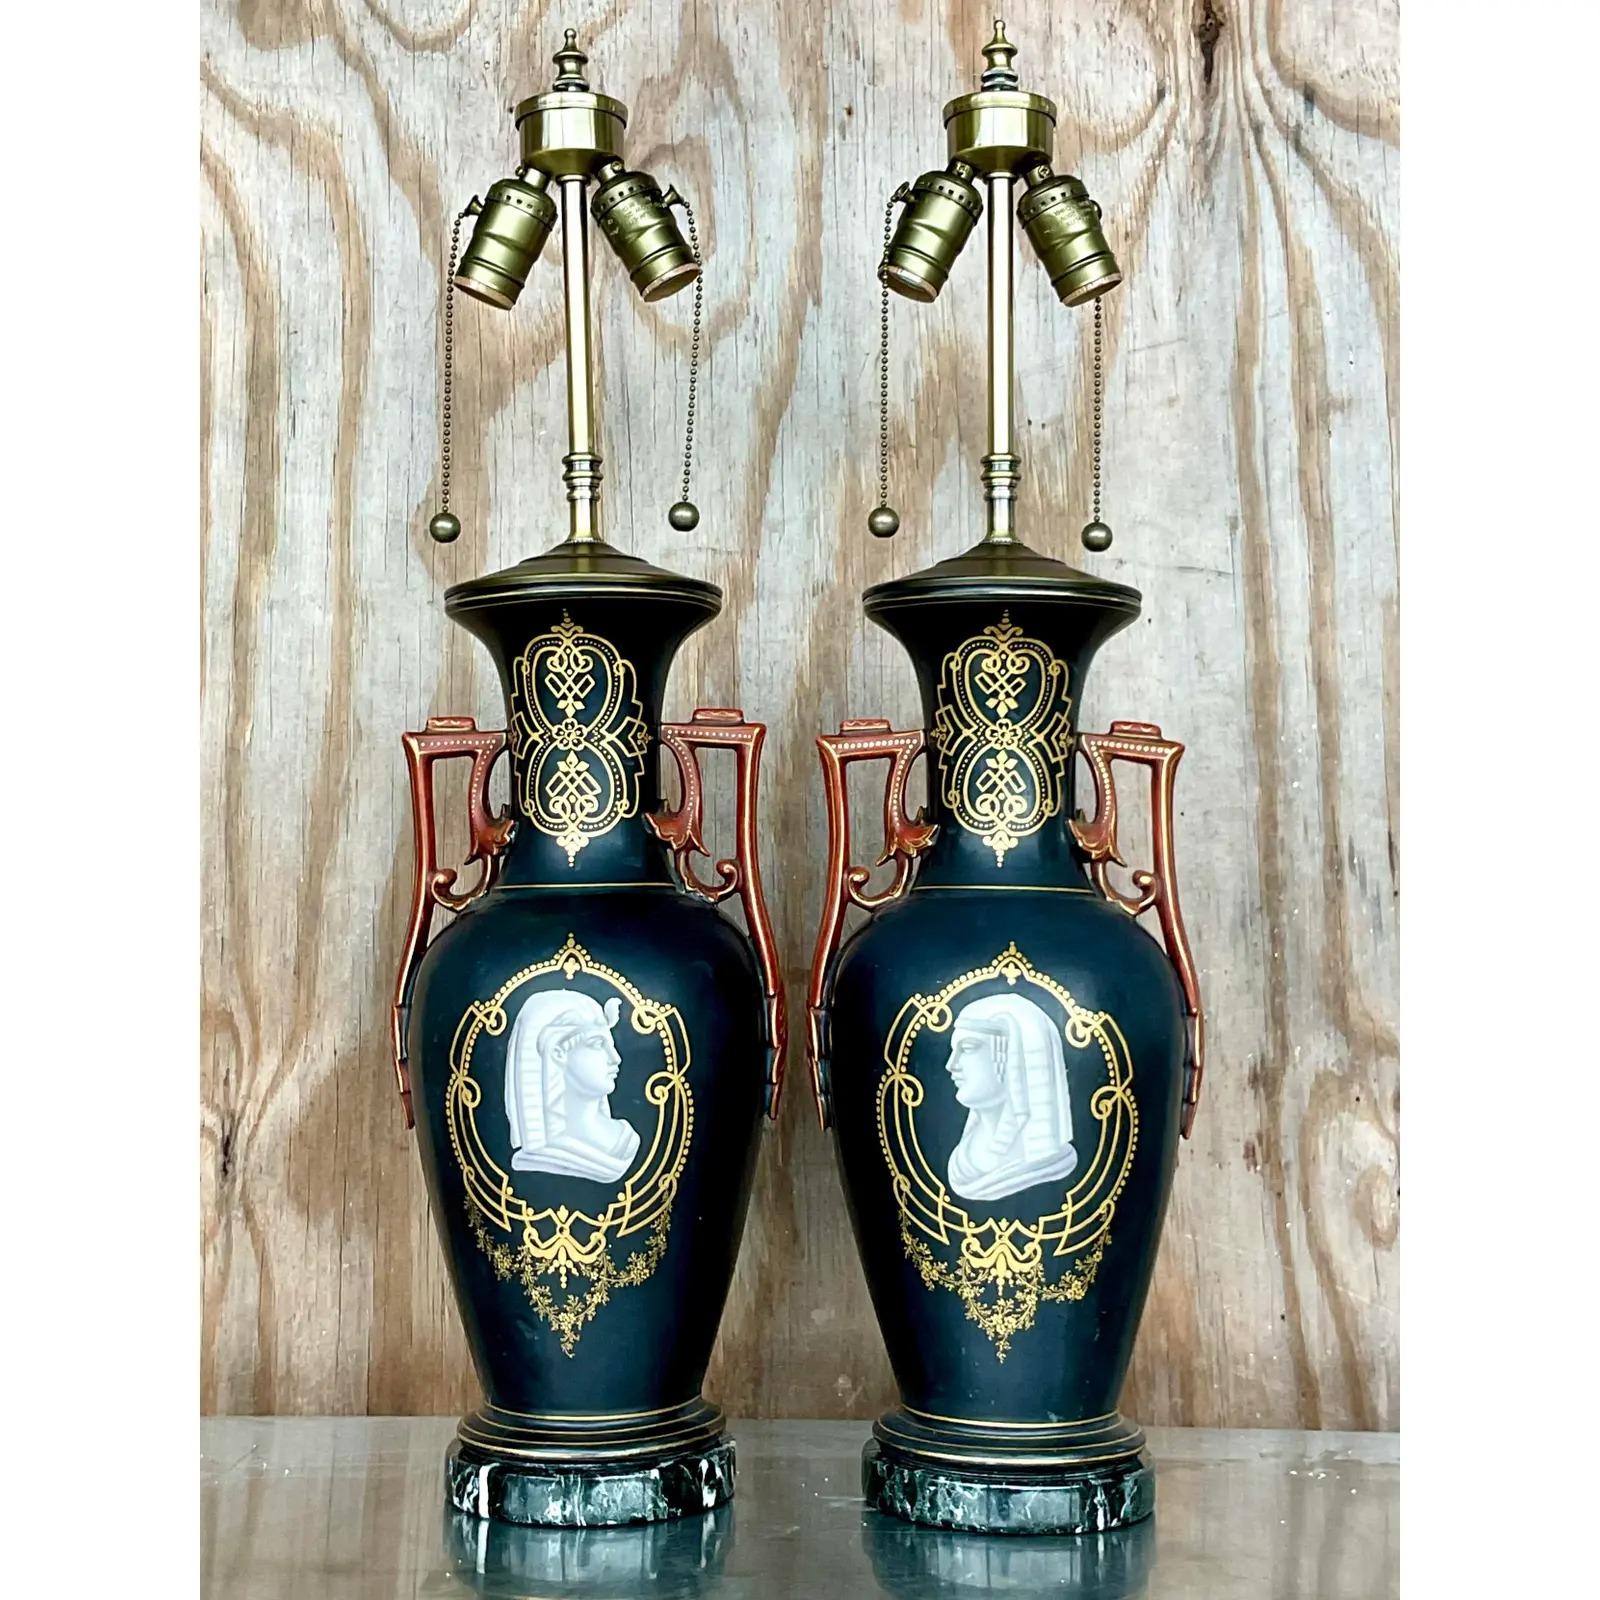 Incredible pair of vintage Minton table lamps. A dramatic transfer print of Egyptian Pharaohs on a matte black background. All new hardware, wiring and black marble plinths. Acquired from a Palm Beach estate.